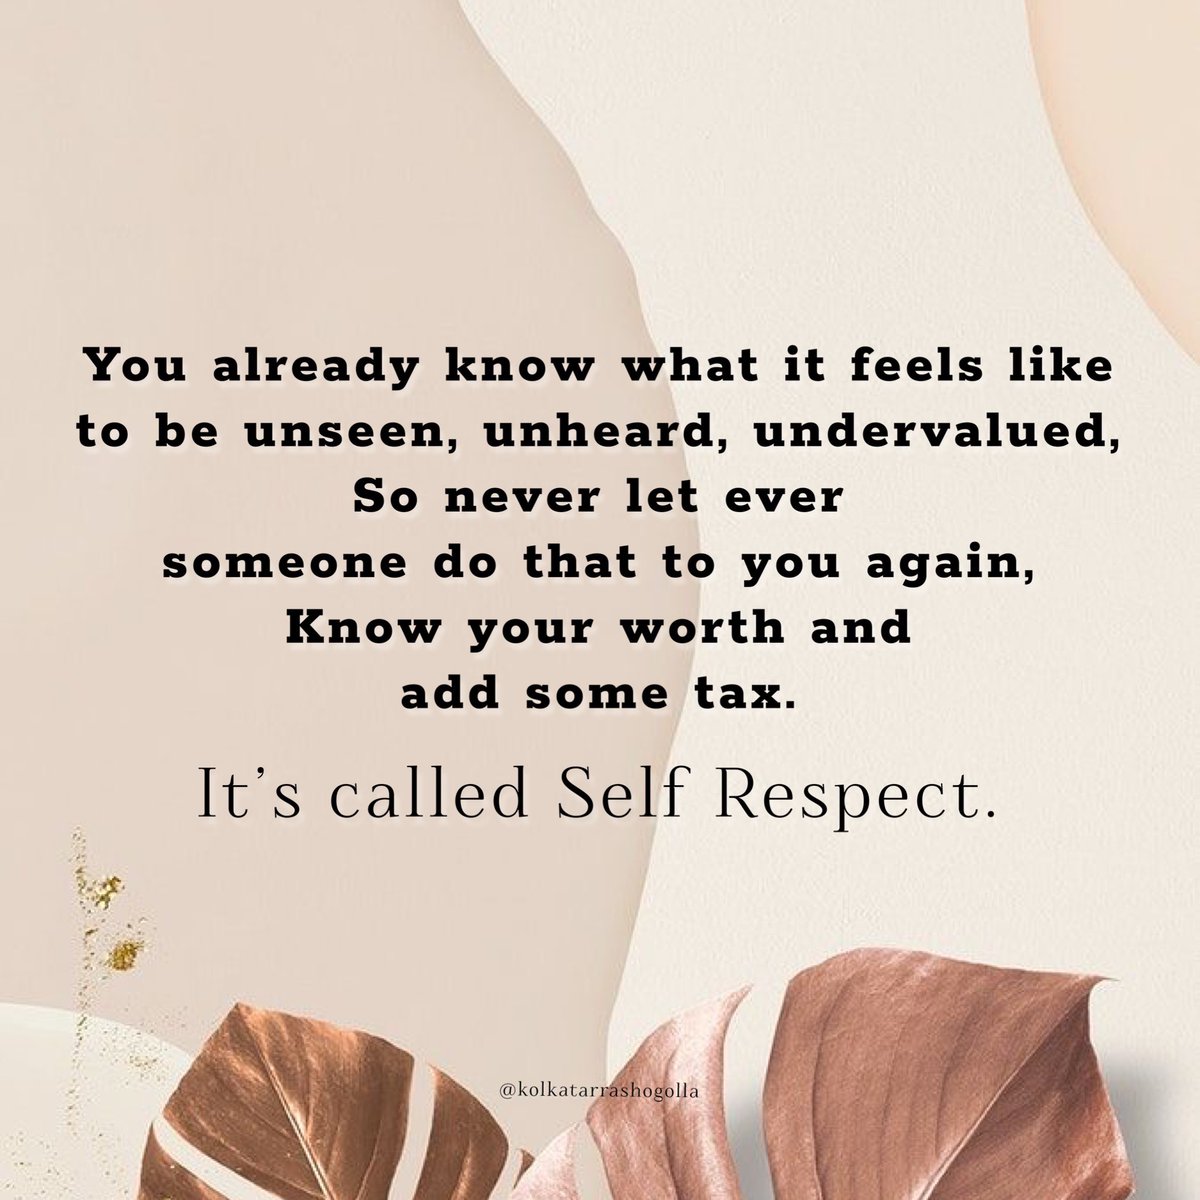 Pur Self Respect First Always 🤍✨
Drop a ❤️ if you agree 🤞
.

#InspirationalInfluencer #quotesaboutlife #Loveyourself #selfrespect #motivationalquote #lifequotes